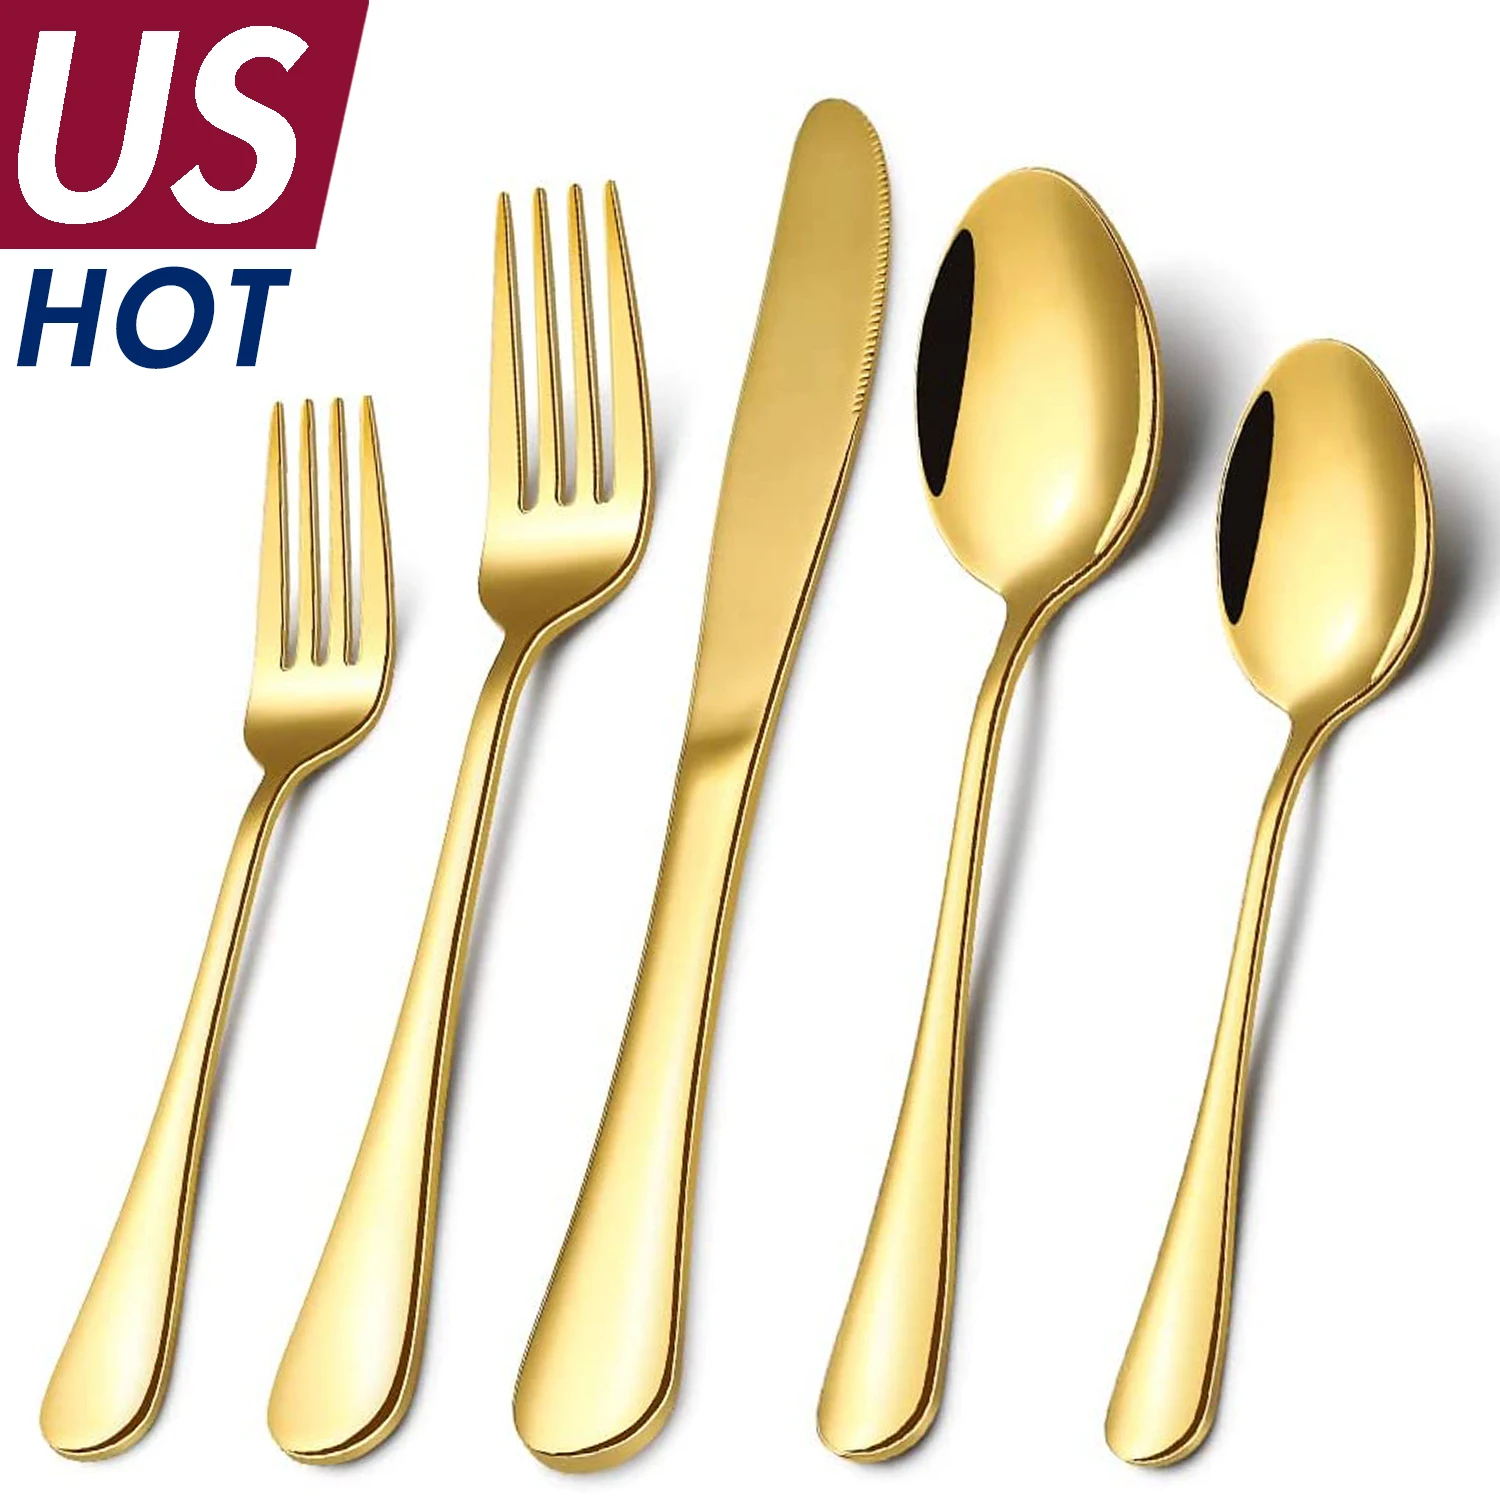 

Wholesale Luxury Metal Silverware Flatware Spoons and Forks Set Wedding Events Golden Plated Cutlery Sets Gold Utensils